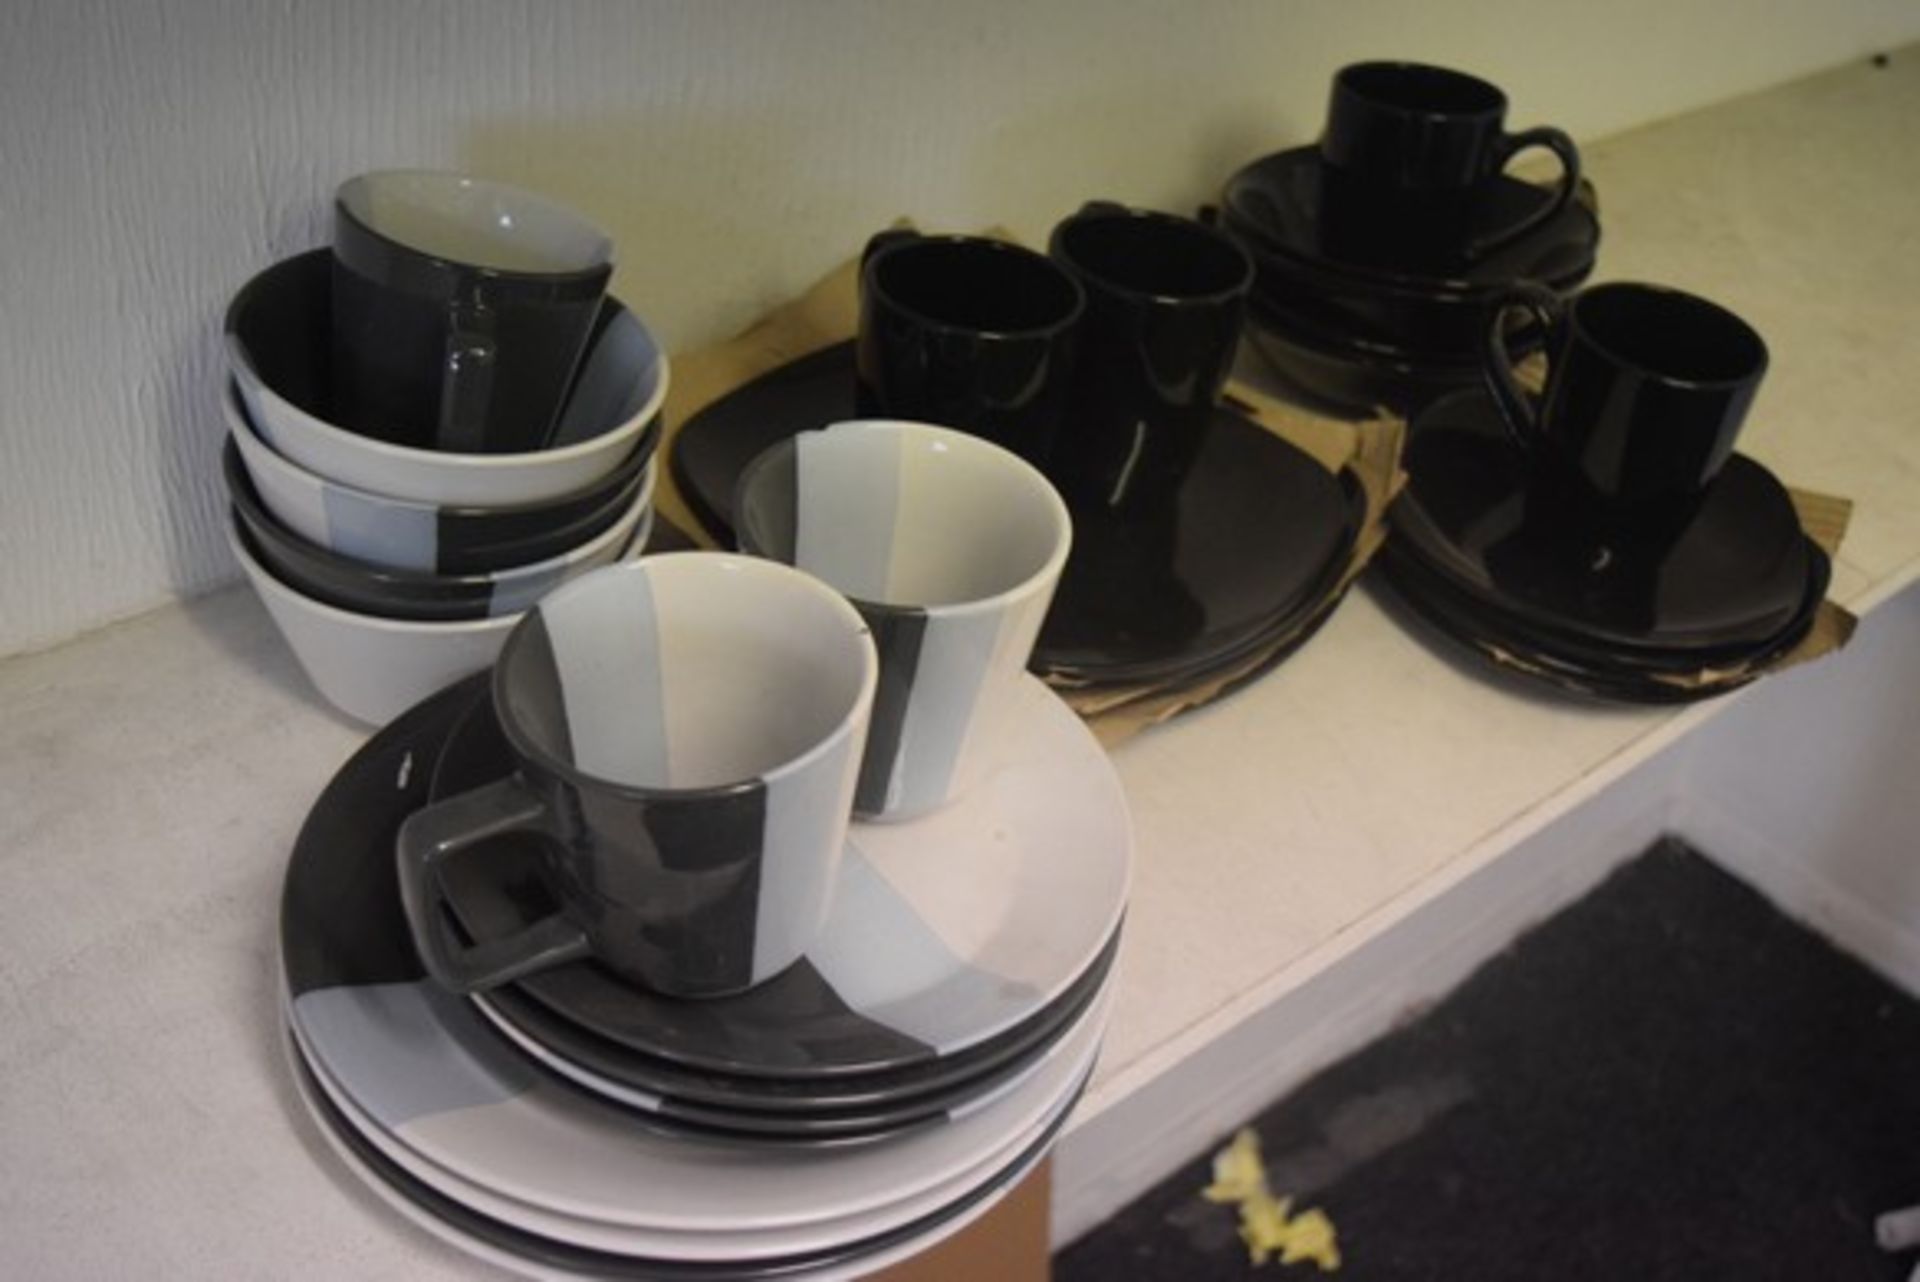 1 x BOXED BRAND NEW 16 PIECE DINNERWARE SET RRP £30 *PLEASE NOTE THAT THE BID PRICE IS MULTIPLIED BY